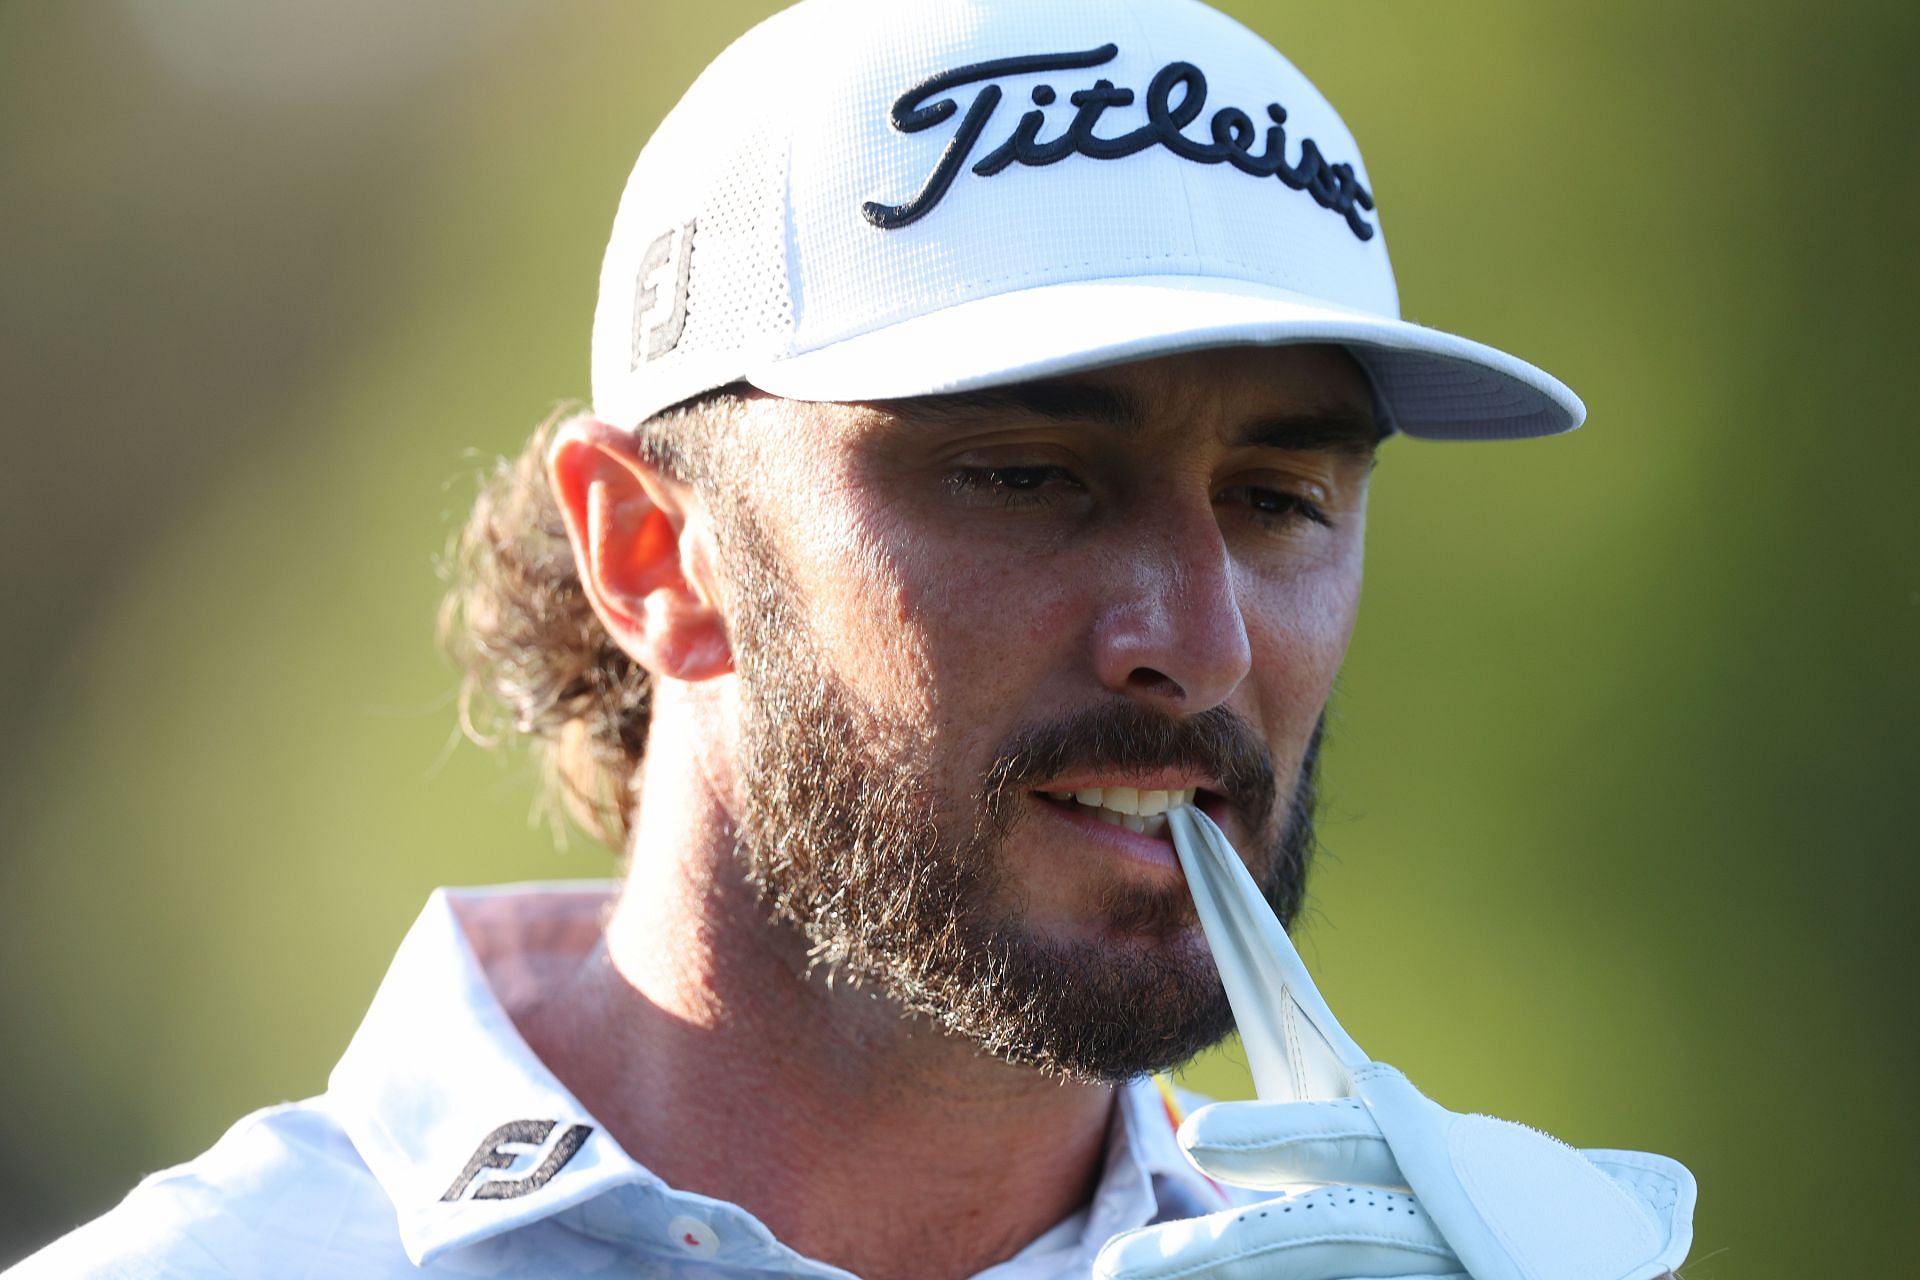 Max Homa was the highest-ranked golfer to miss the cut at the 123rd U.S. Open Championship